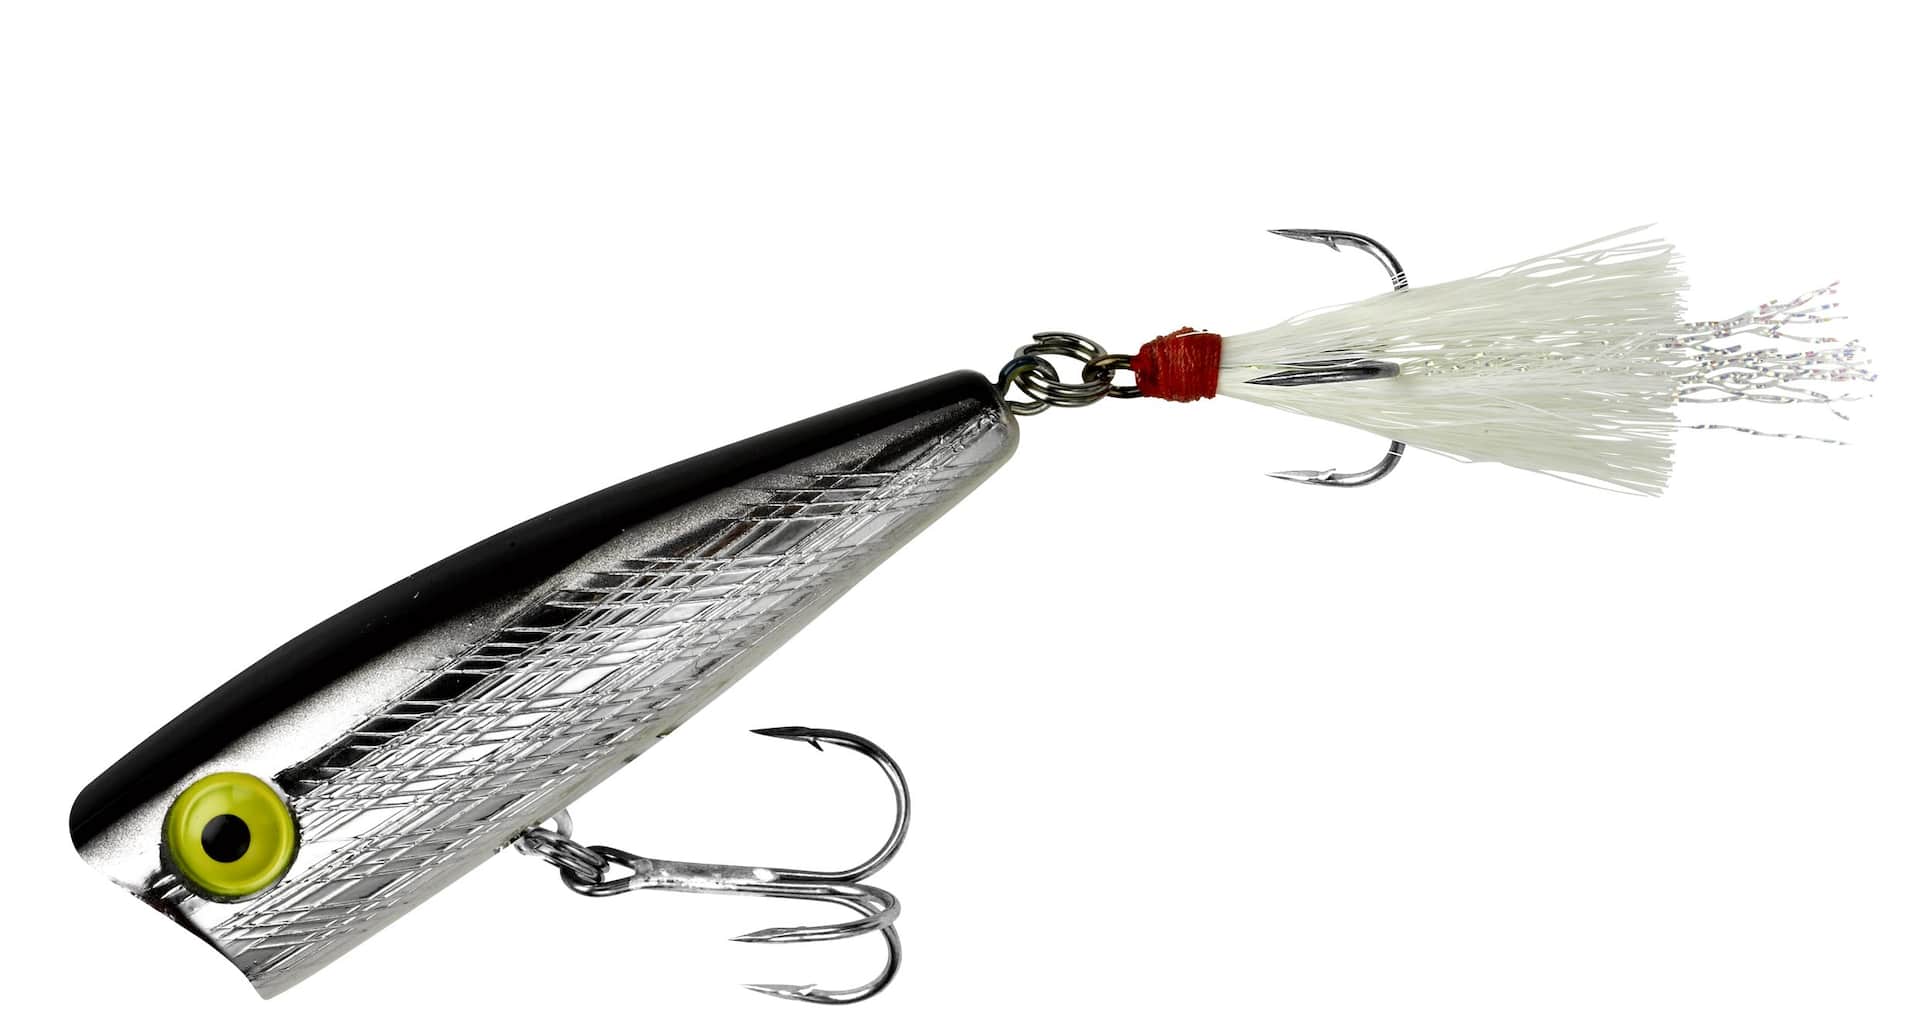 Rebel Crickhopper Fishing Lure, Fire Tiger, 1/2 in, Topwater Lures -   Canada